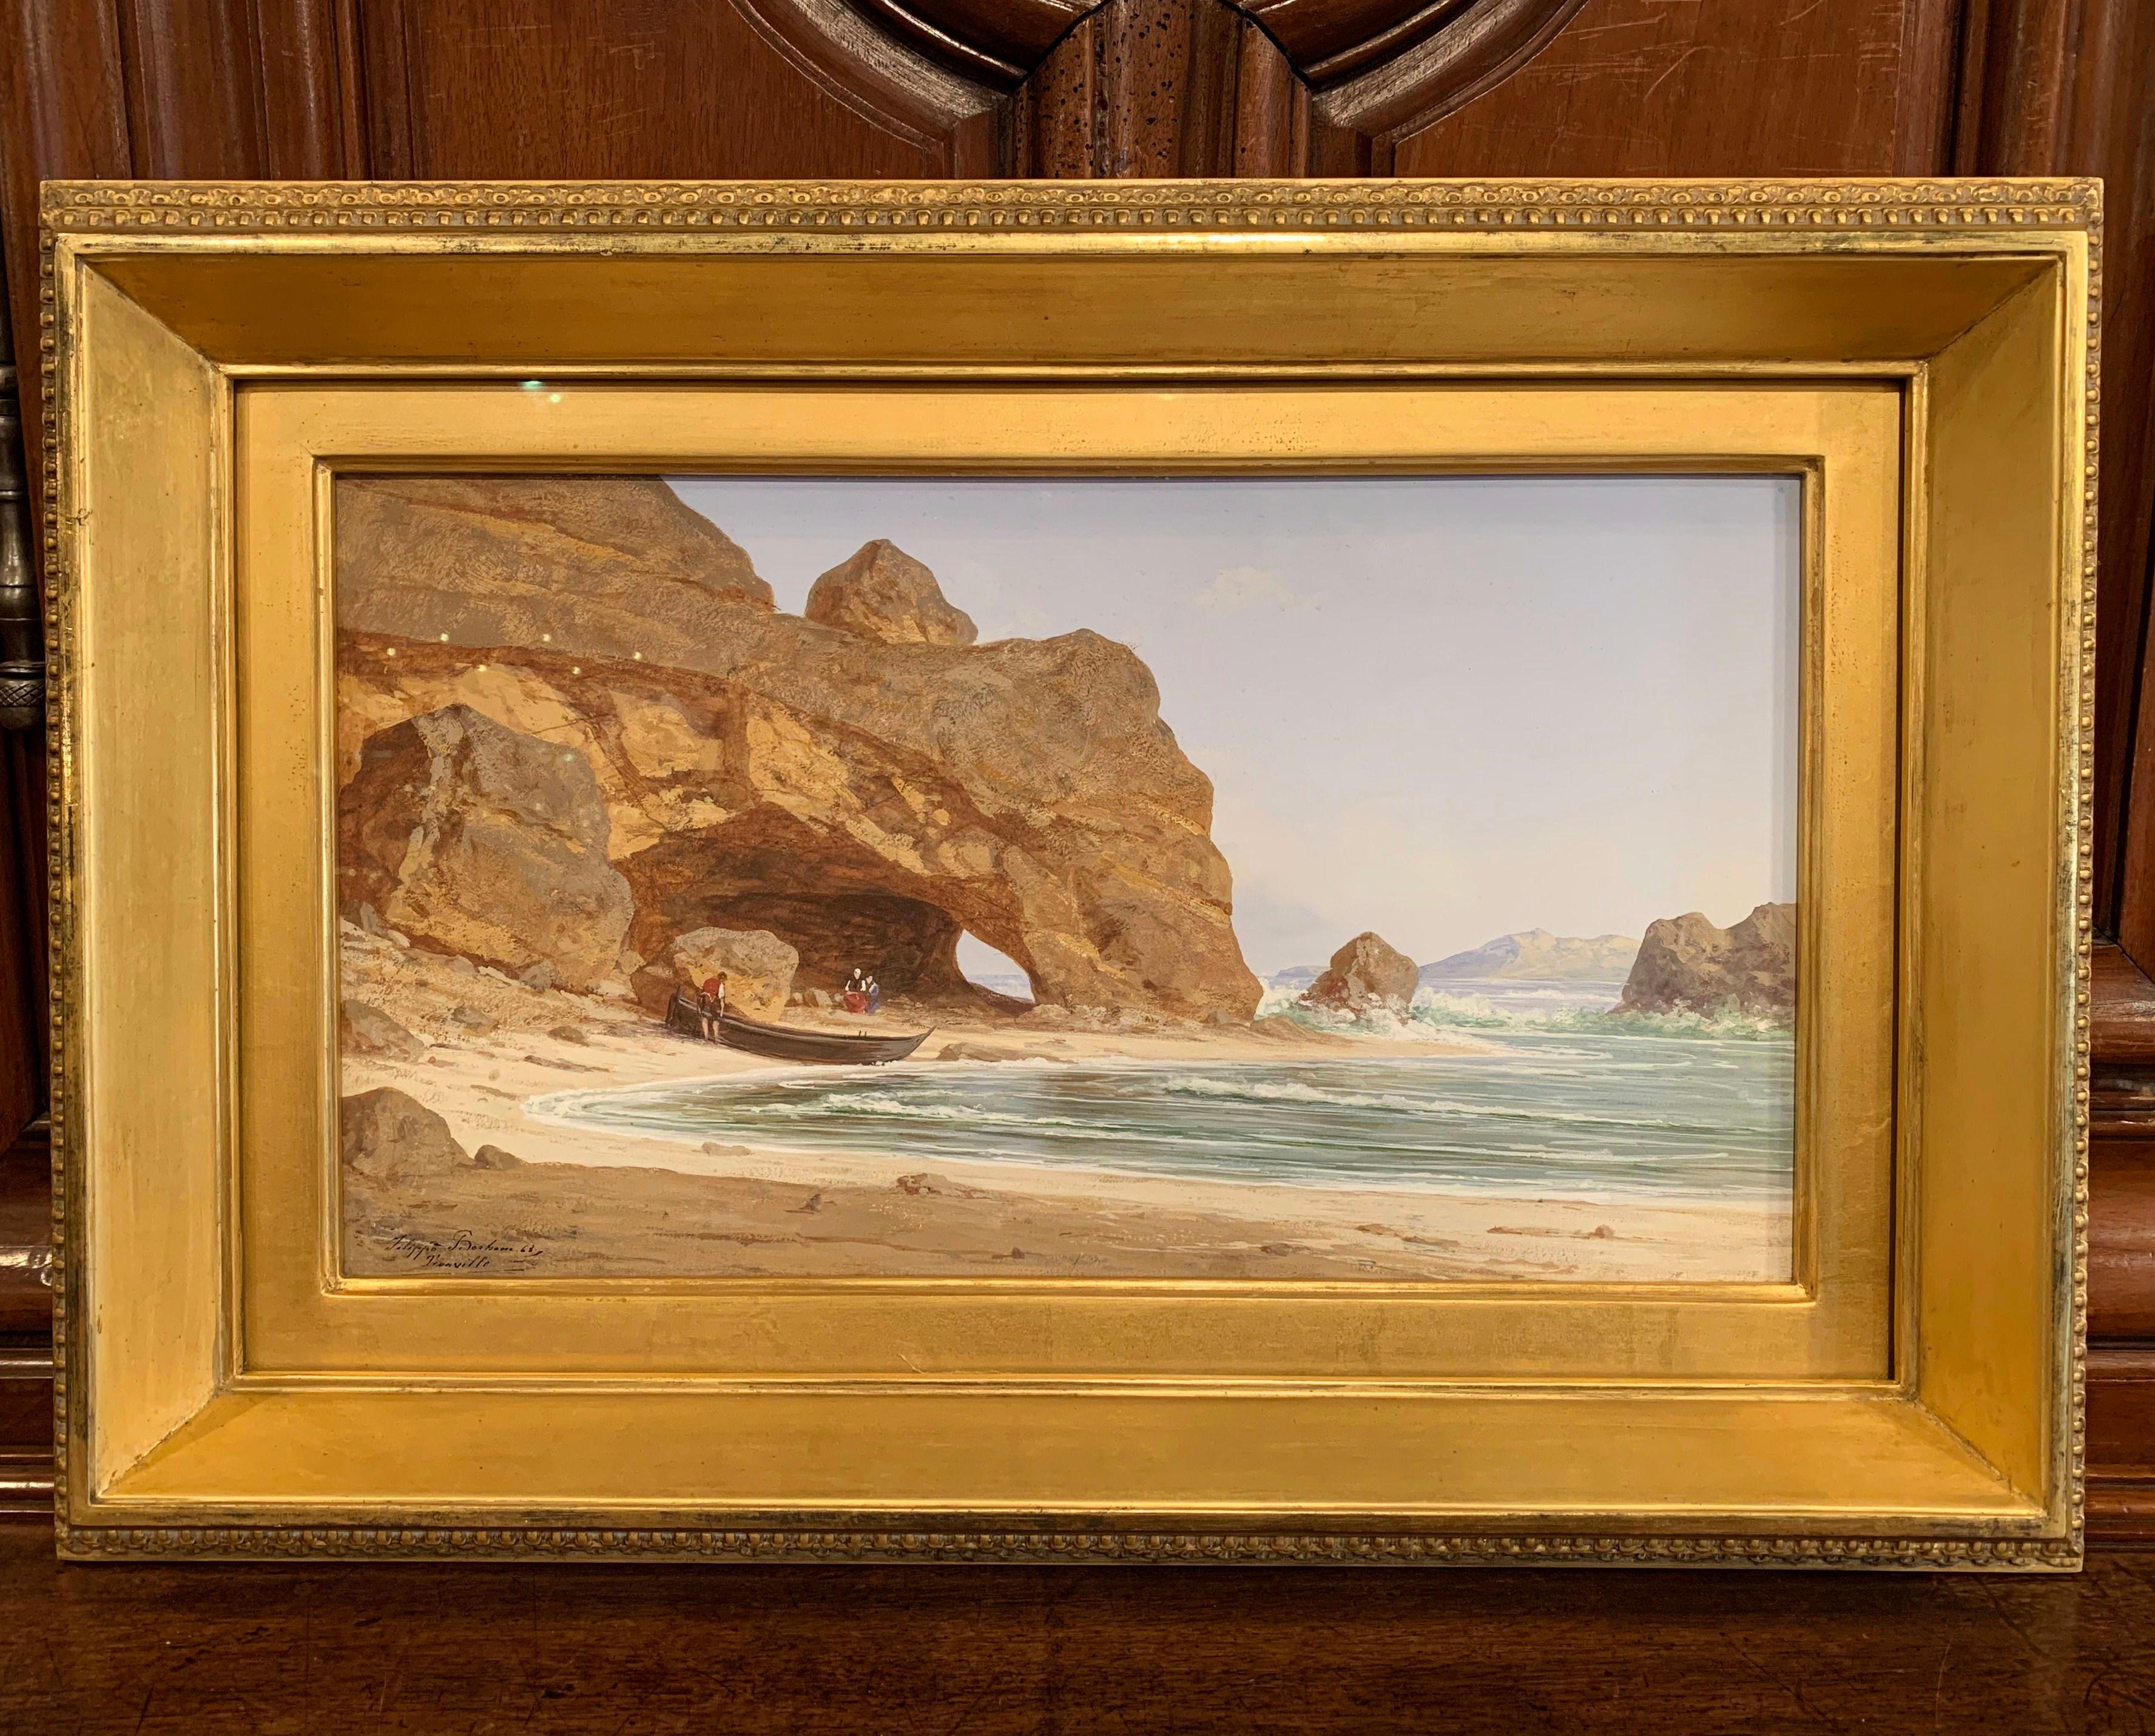 This serene, antique gouache on paper depicts the Normand coast in Trouville, France. The colorful, seascape is set in a carved gilt frame and is protected with a piece of glass. The peaceful landscape painting is signed and dated in the lower left